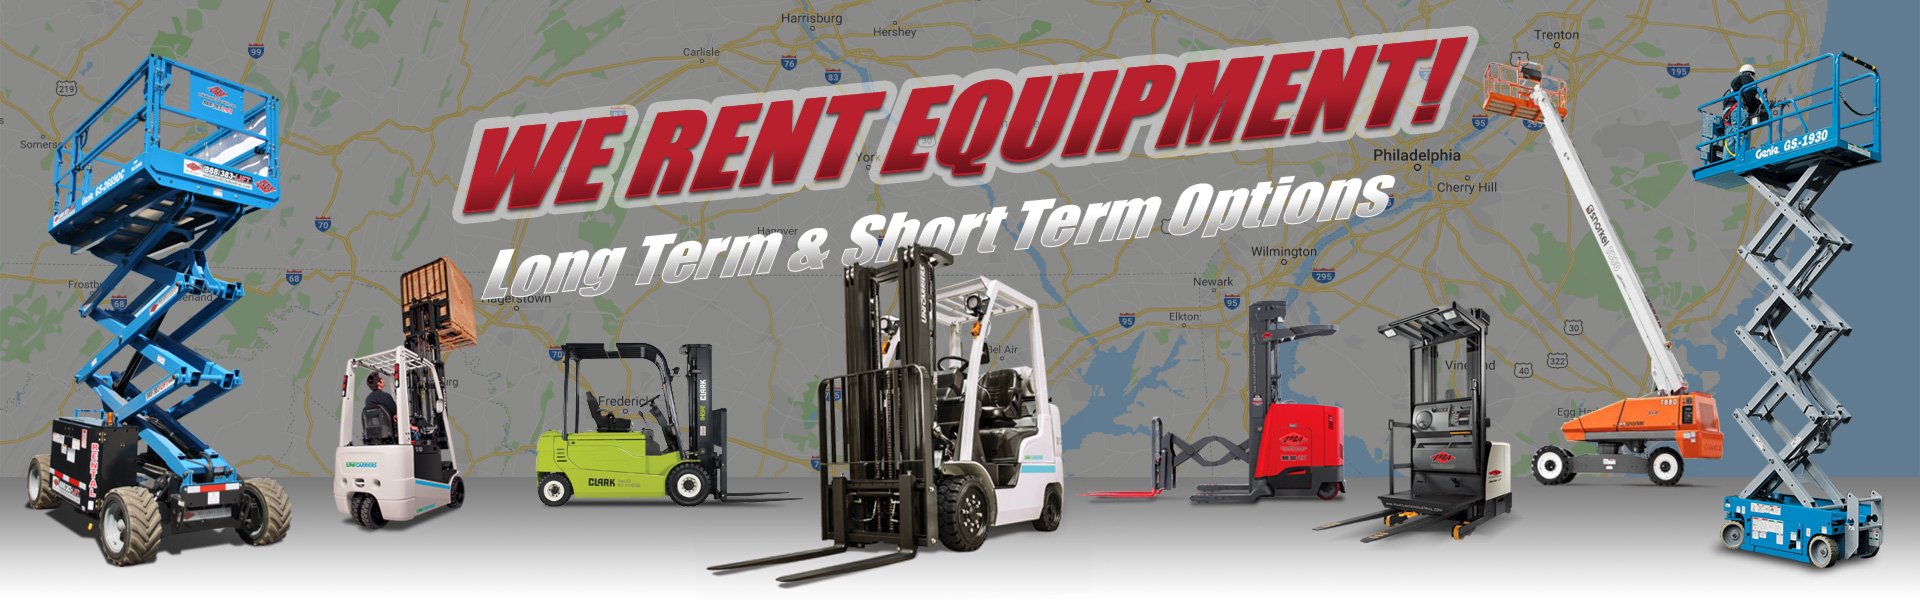 We Rent Equipment - Forklifts and Other Material Handling Equipment - Long Term and Short Term Equipment Rental Options Available